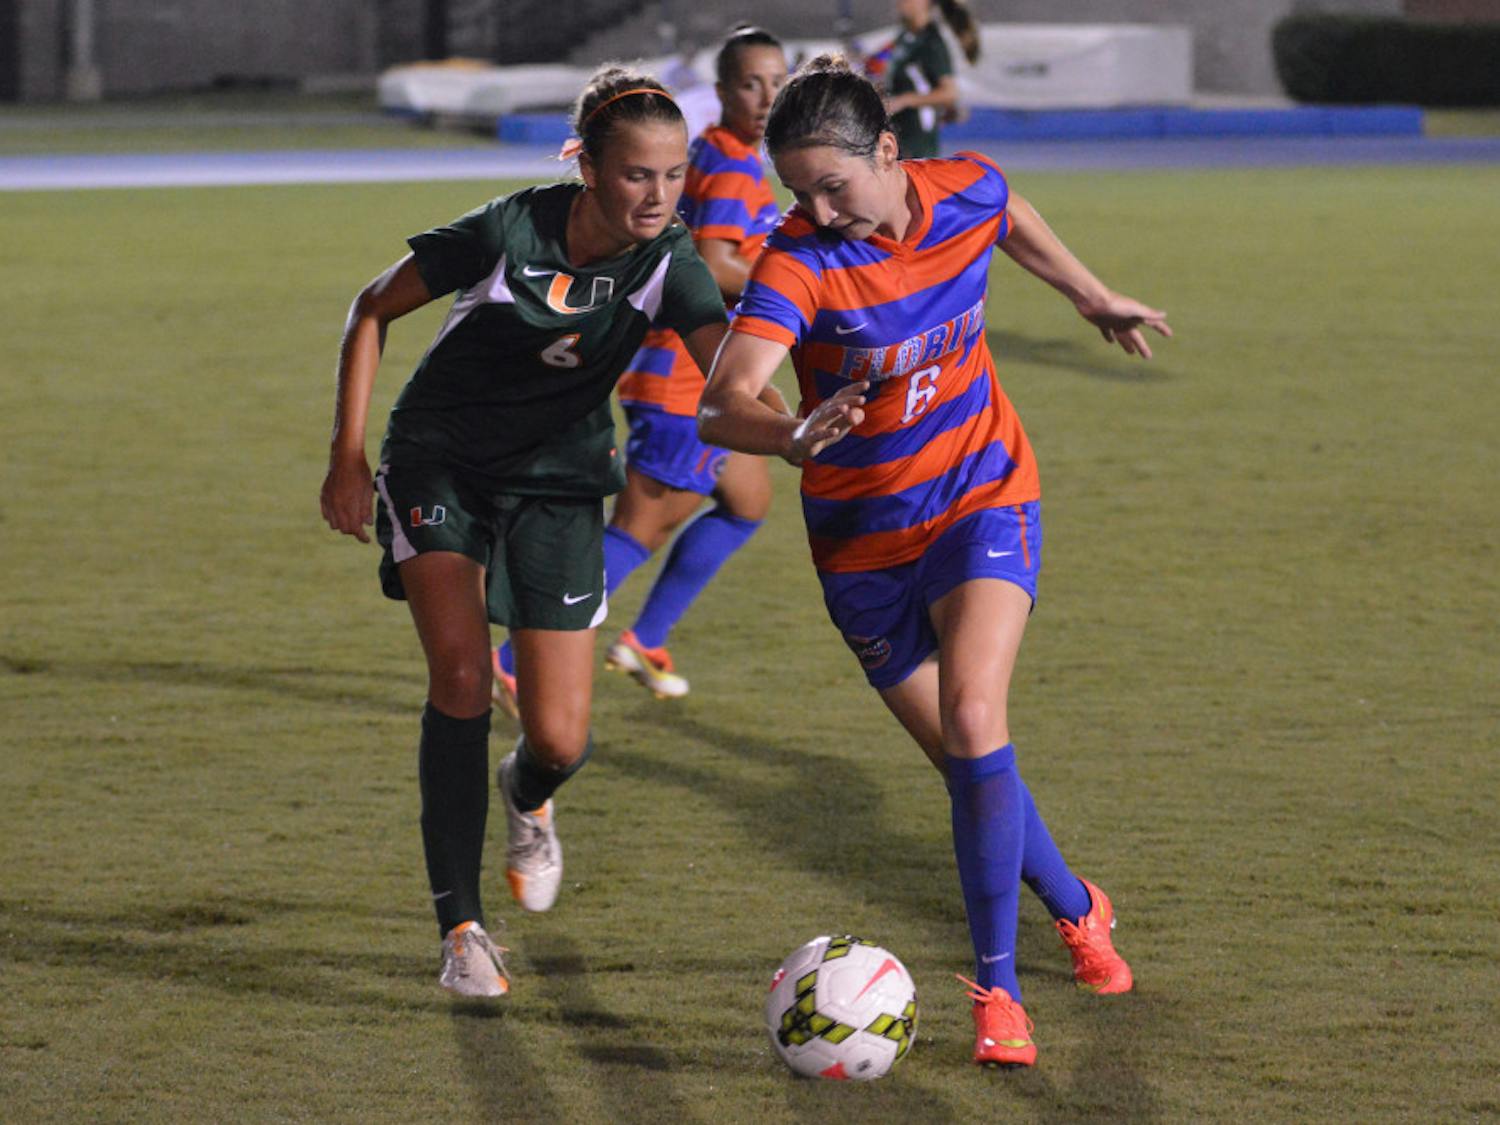 Junior midfielder Lauren Smith dribbles the ball during Florida's 3-0 win against Miami on Friday at James G. Pressly Stadium.